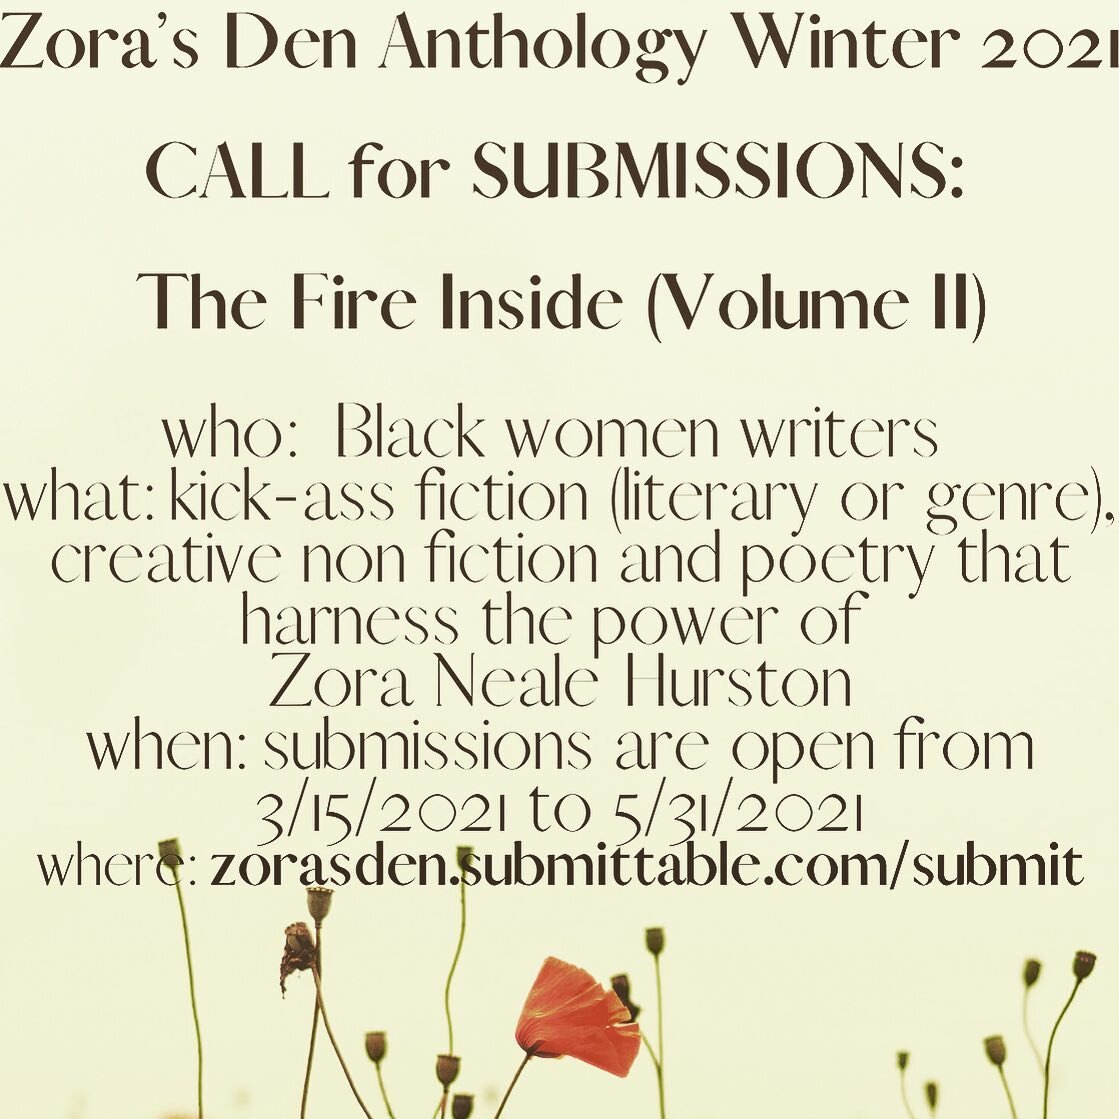 Submissions are open for The Fire Inside, Volume II.

Following the success of Zora&rsquo;s Den&rsquo;s first anthology, we want your kick-ass fiction, your soulful non-fiction, and your bold poetry.

Zora Neale Hurston was known for her spunk. Let&r